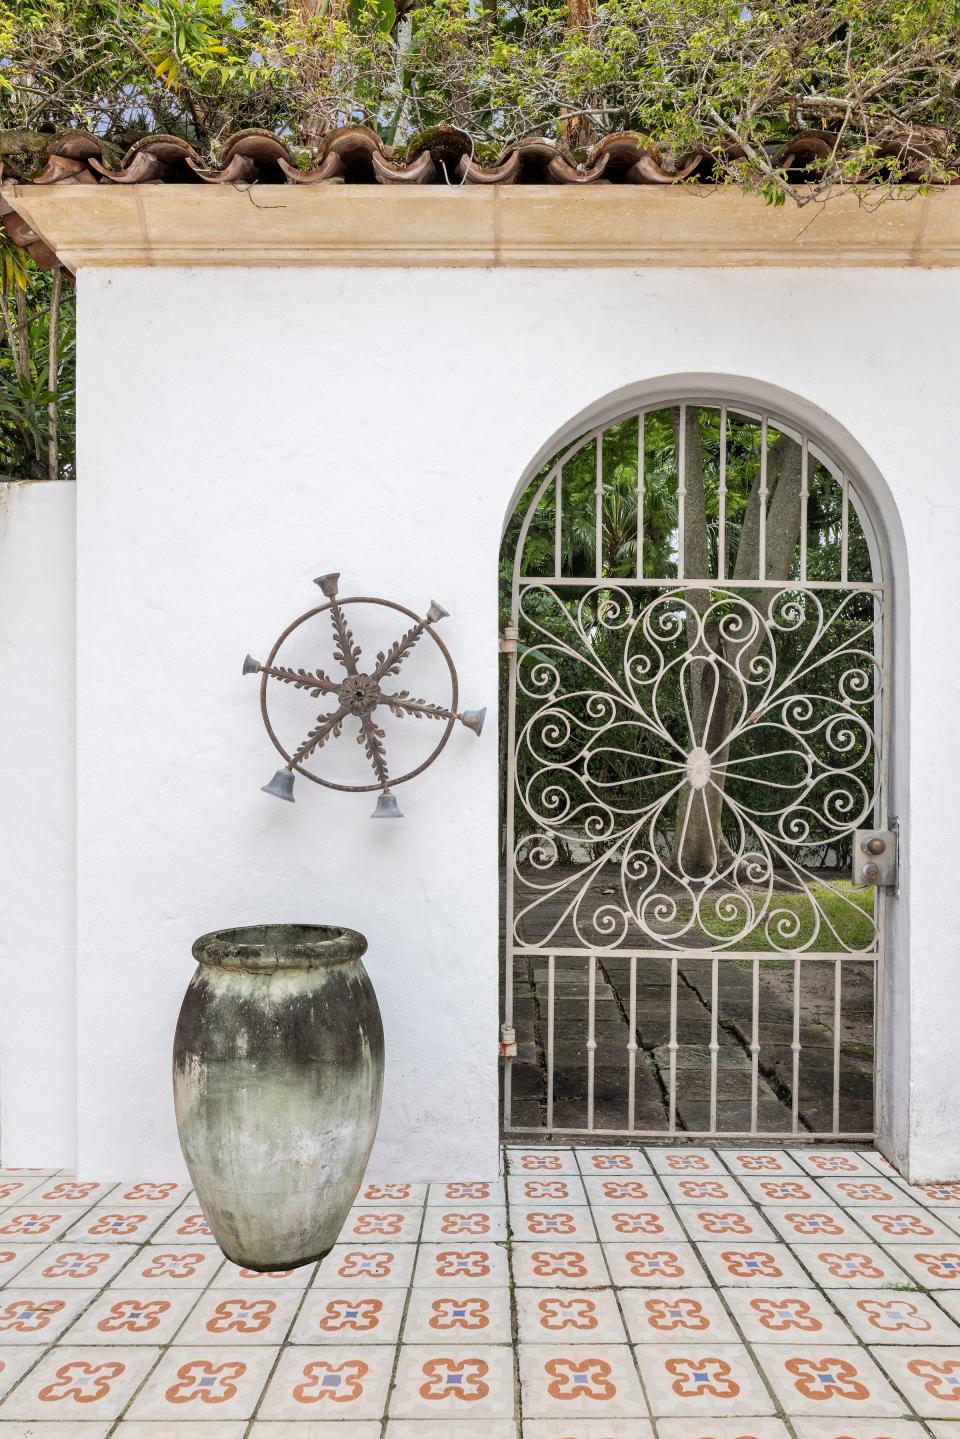 A revolving metal wheel with bells – the house’s “doorbell” – is mounted on the courtyard wall by the entrance gate.